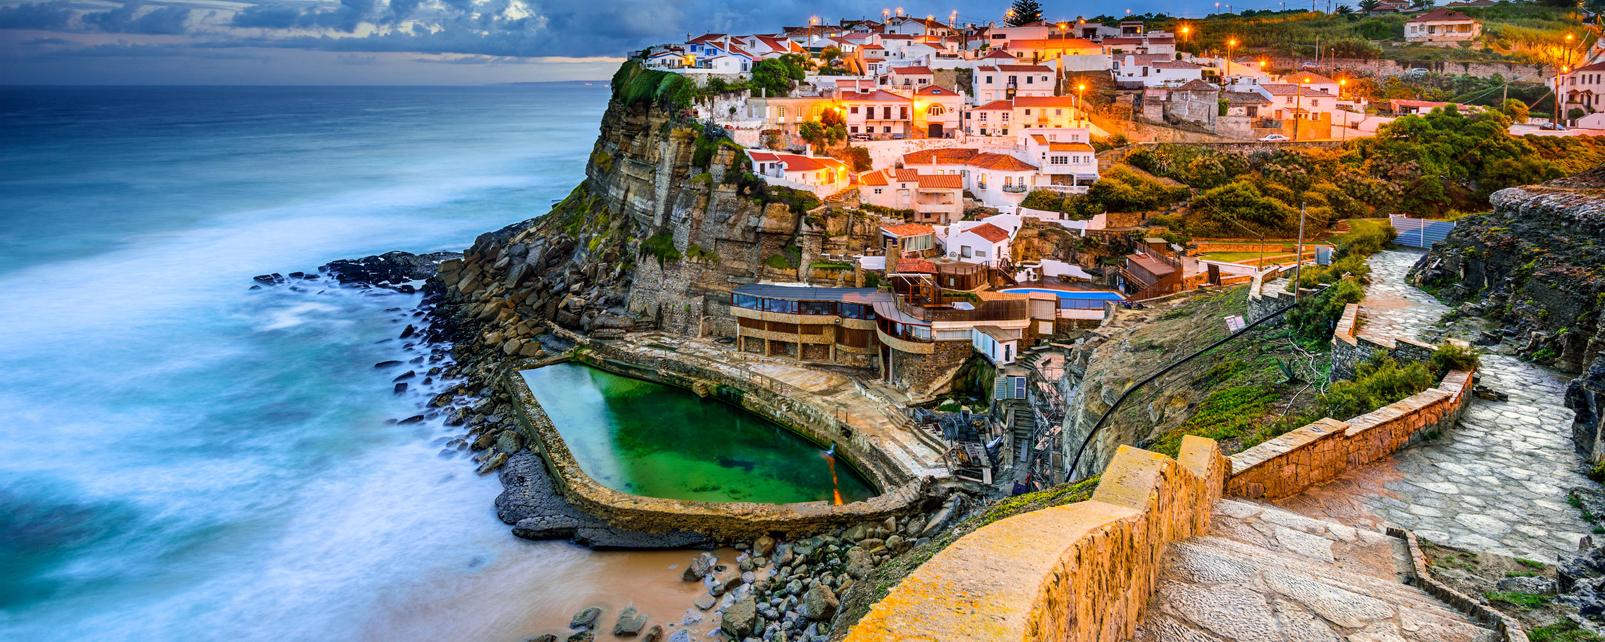 Portugal  Golden Residency Permit Program Continues to Gain Momentum